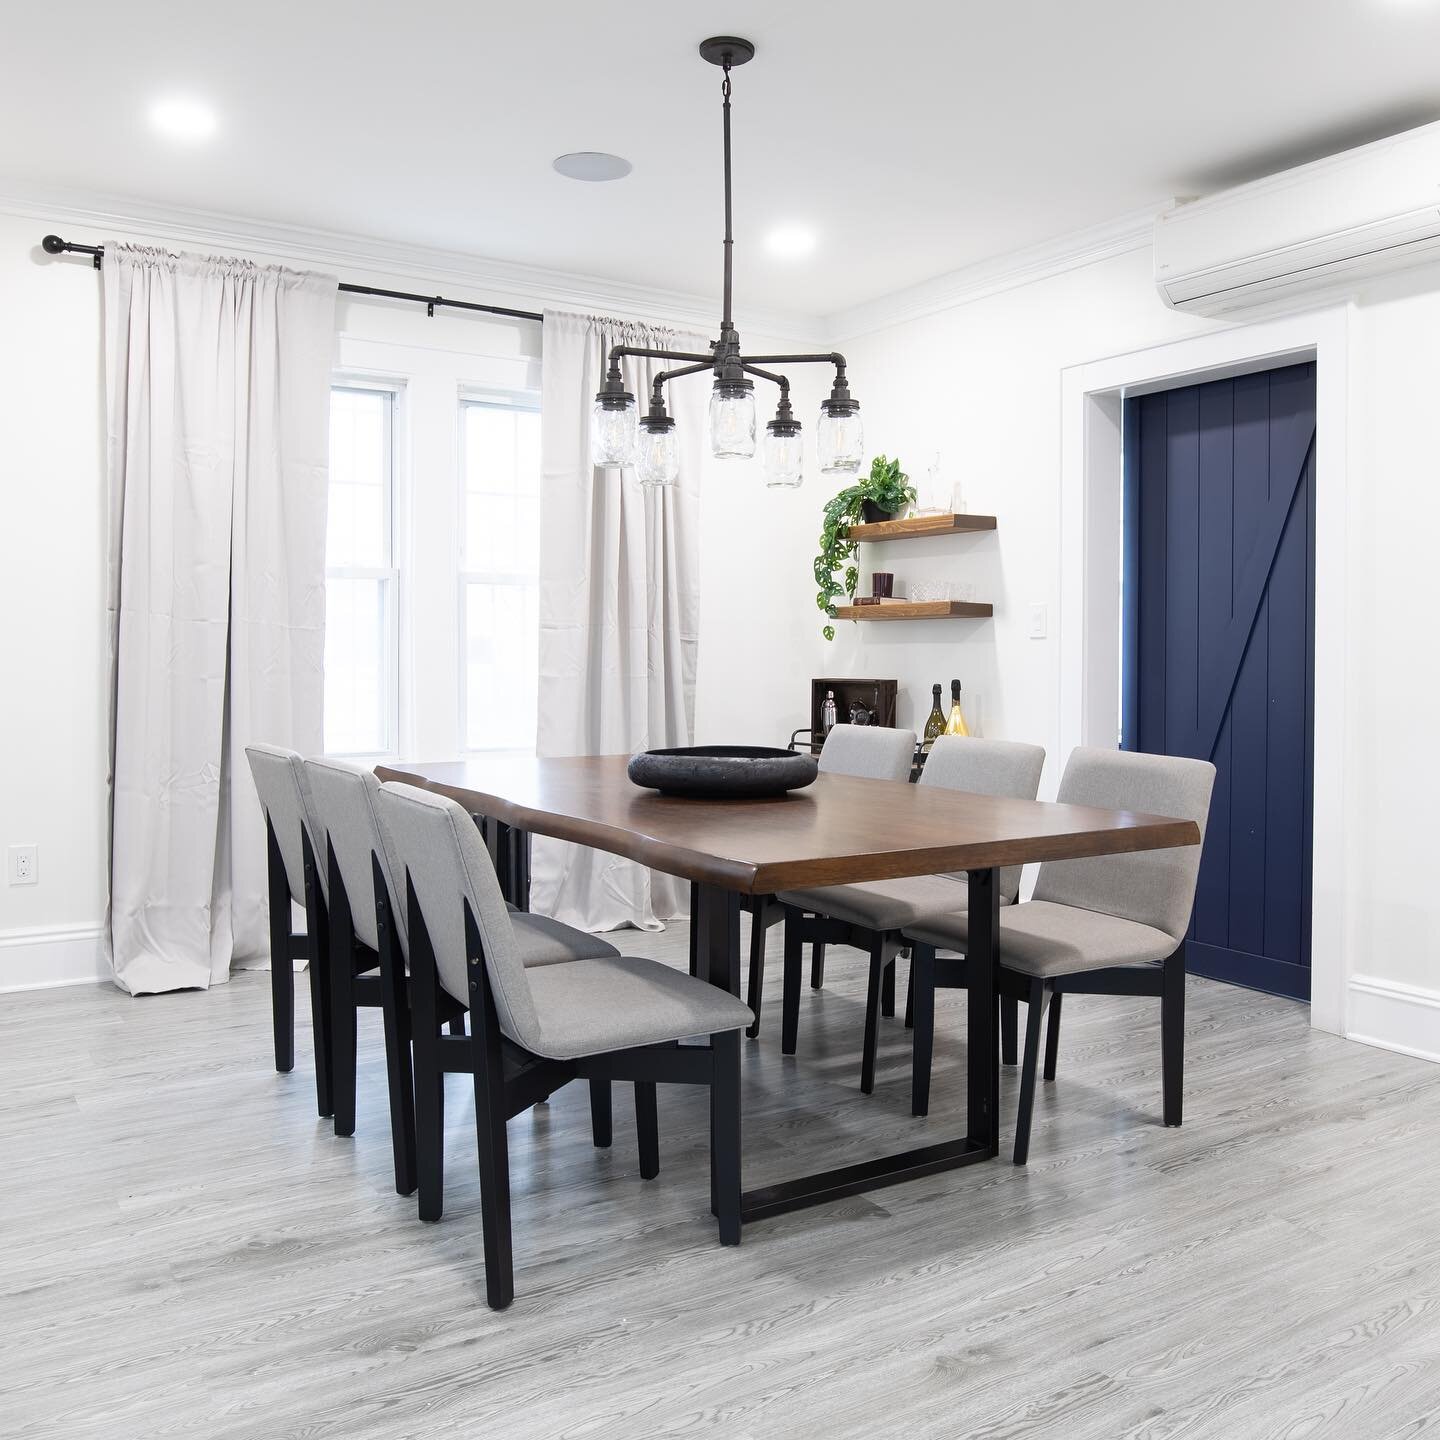 We underestimate the power decor has in a space. Decorative items help bring life and love to all different types of spaces. 

SWIPE to see the &ldquo;before&rdquo; of this dining room space for our client. After our client was faced with an extensiv